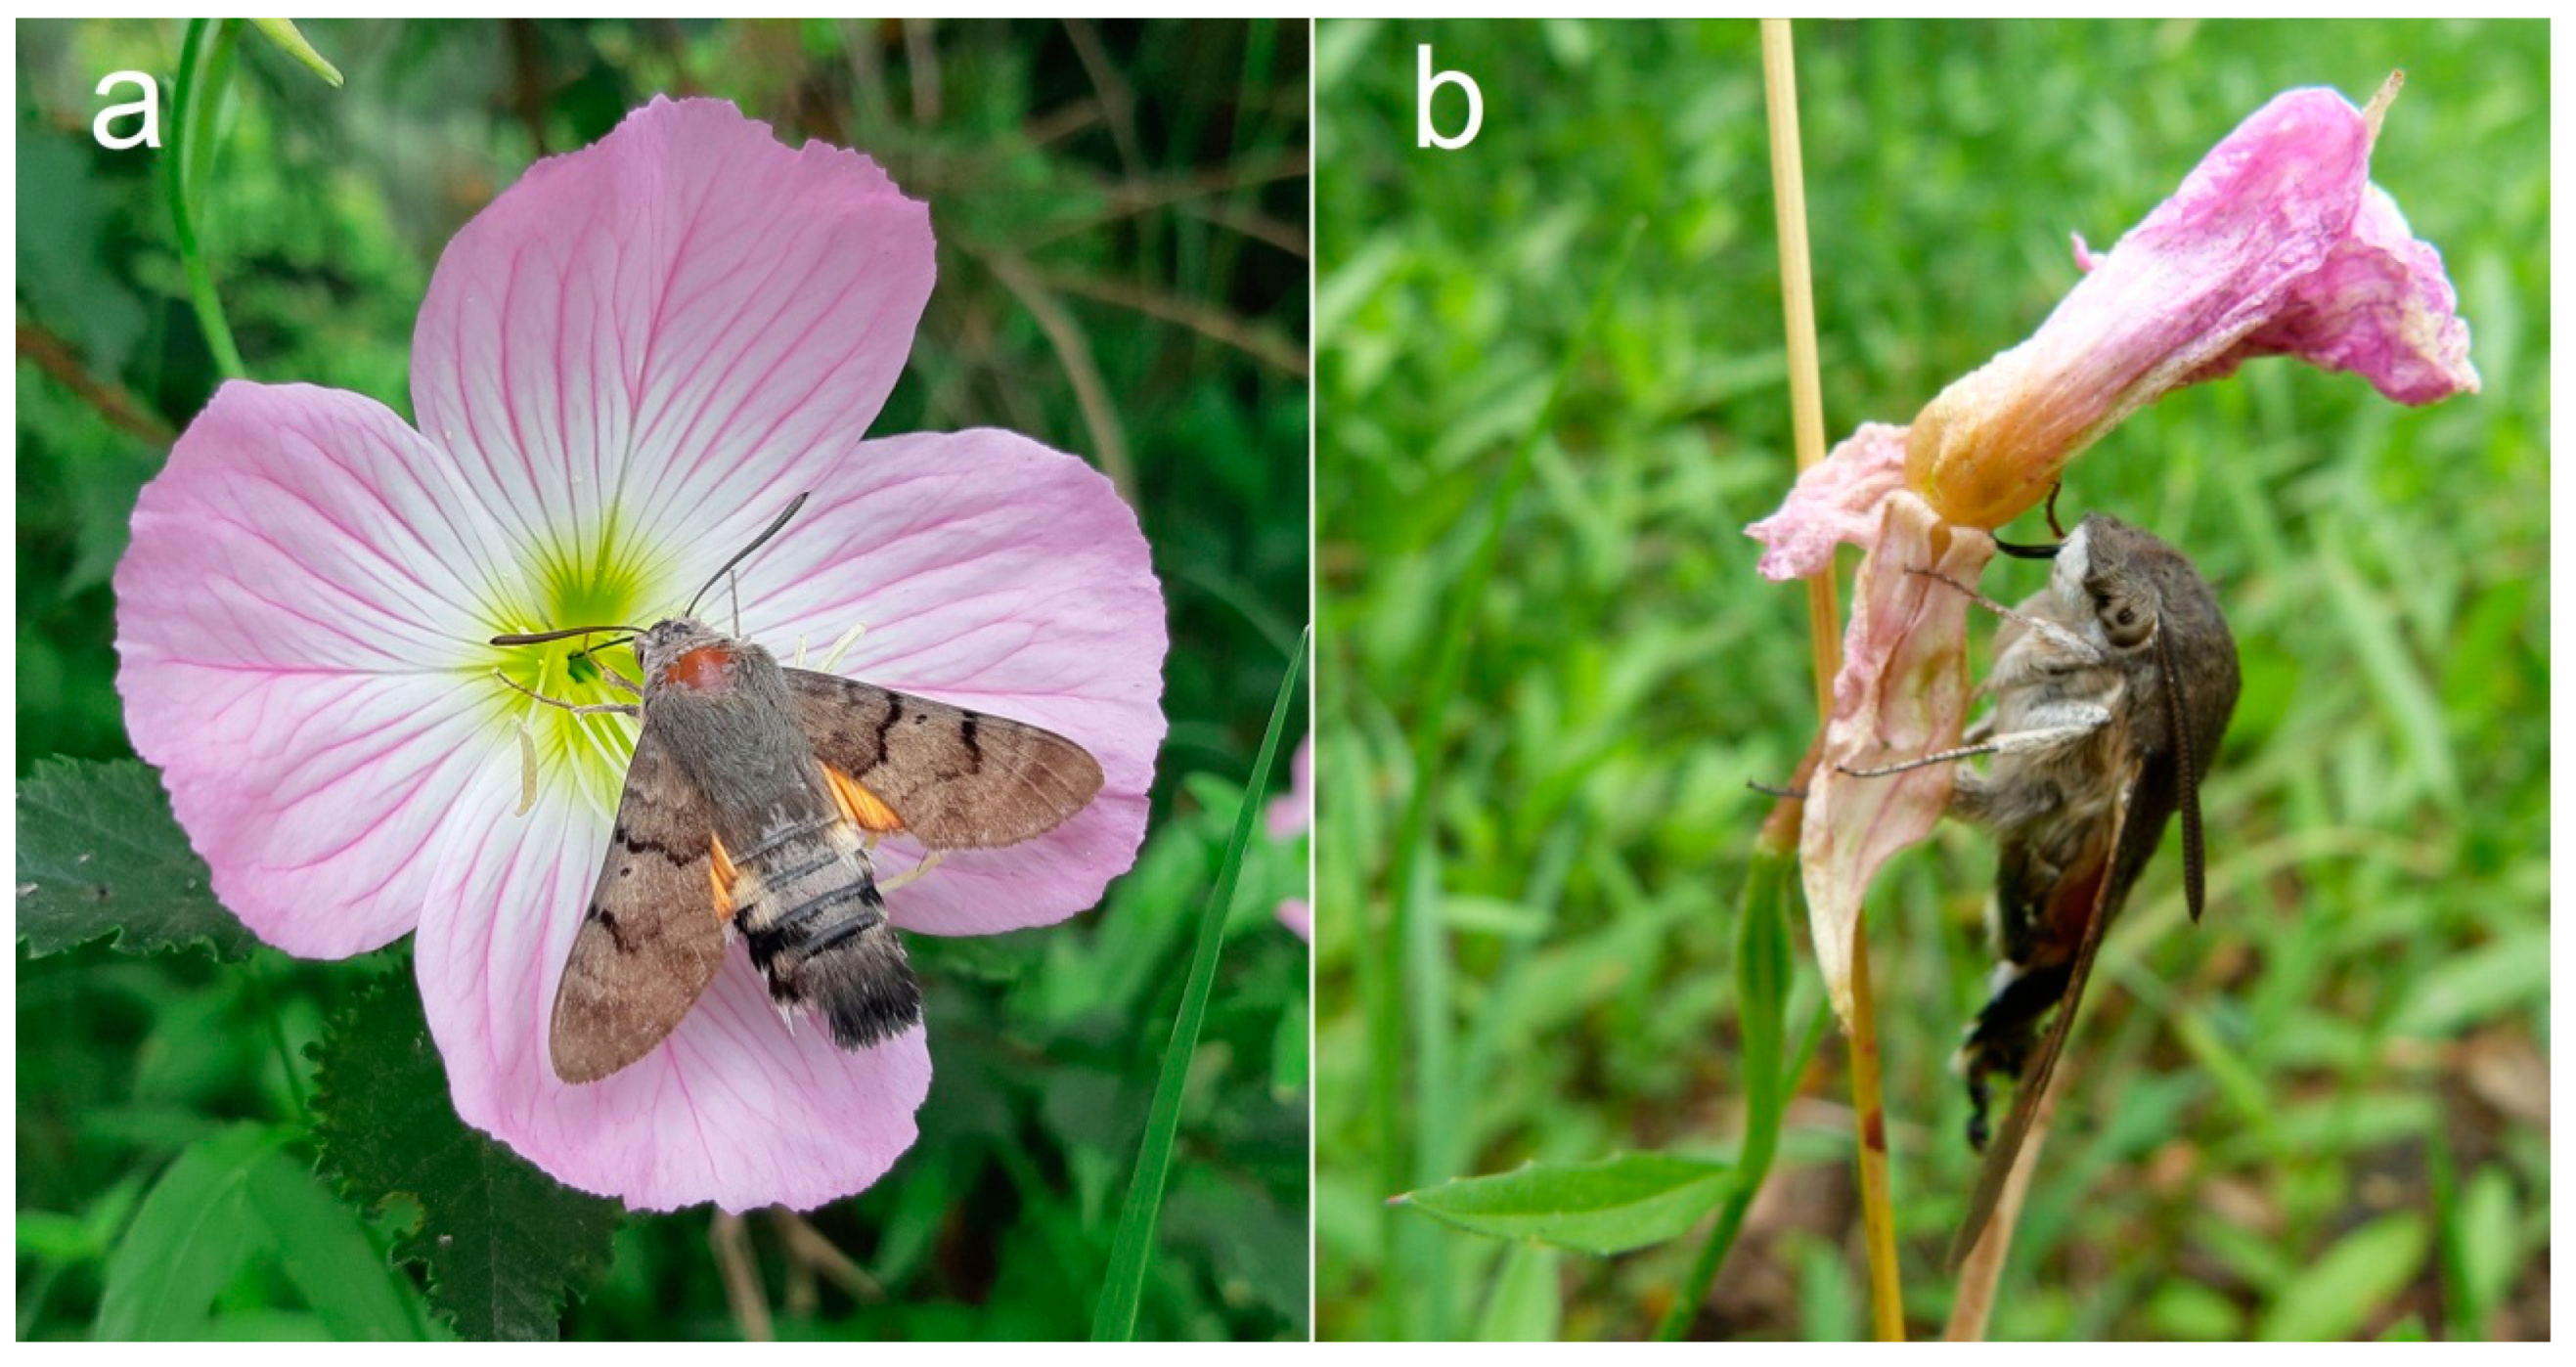 Diversity | Free Full-Text | The Spreading in Europe of the Non-Indigenous  Species Oenothera speciosa Nutt. Might Be a Threat to the Autochthonous  Moth Macroglossum stellatarum (Linnaeus, 1758)? A New Case Study